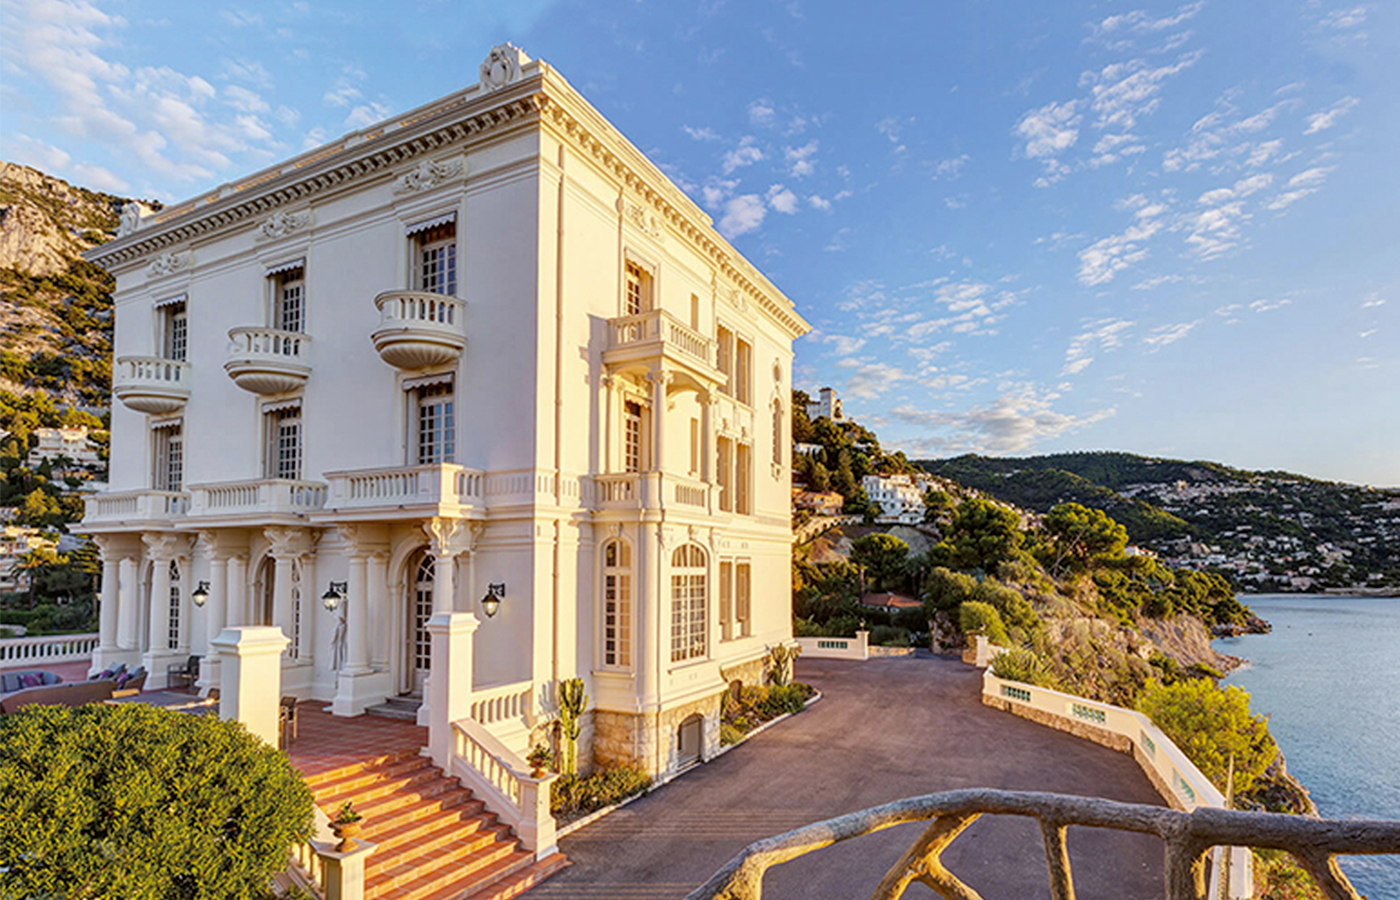 Terrace and sea view of luxury Belle Epoque wedding villa on the French Riviera